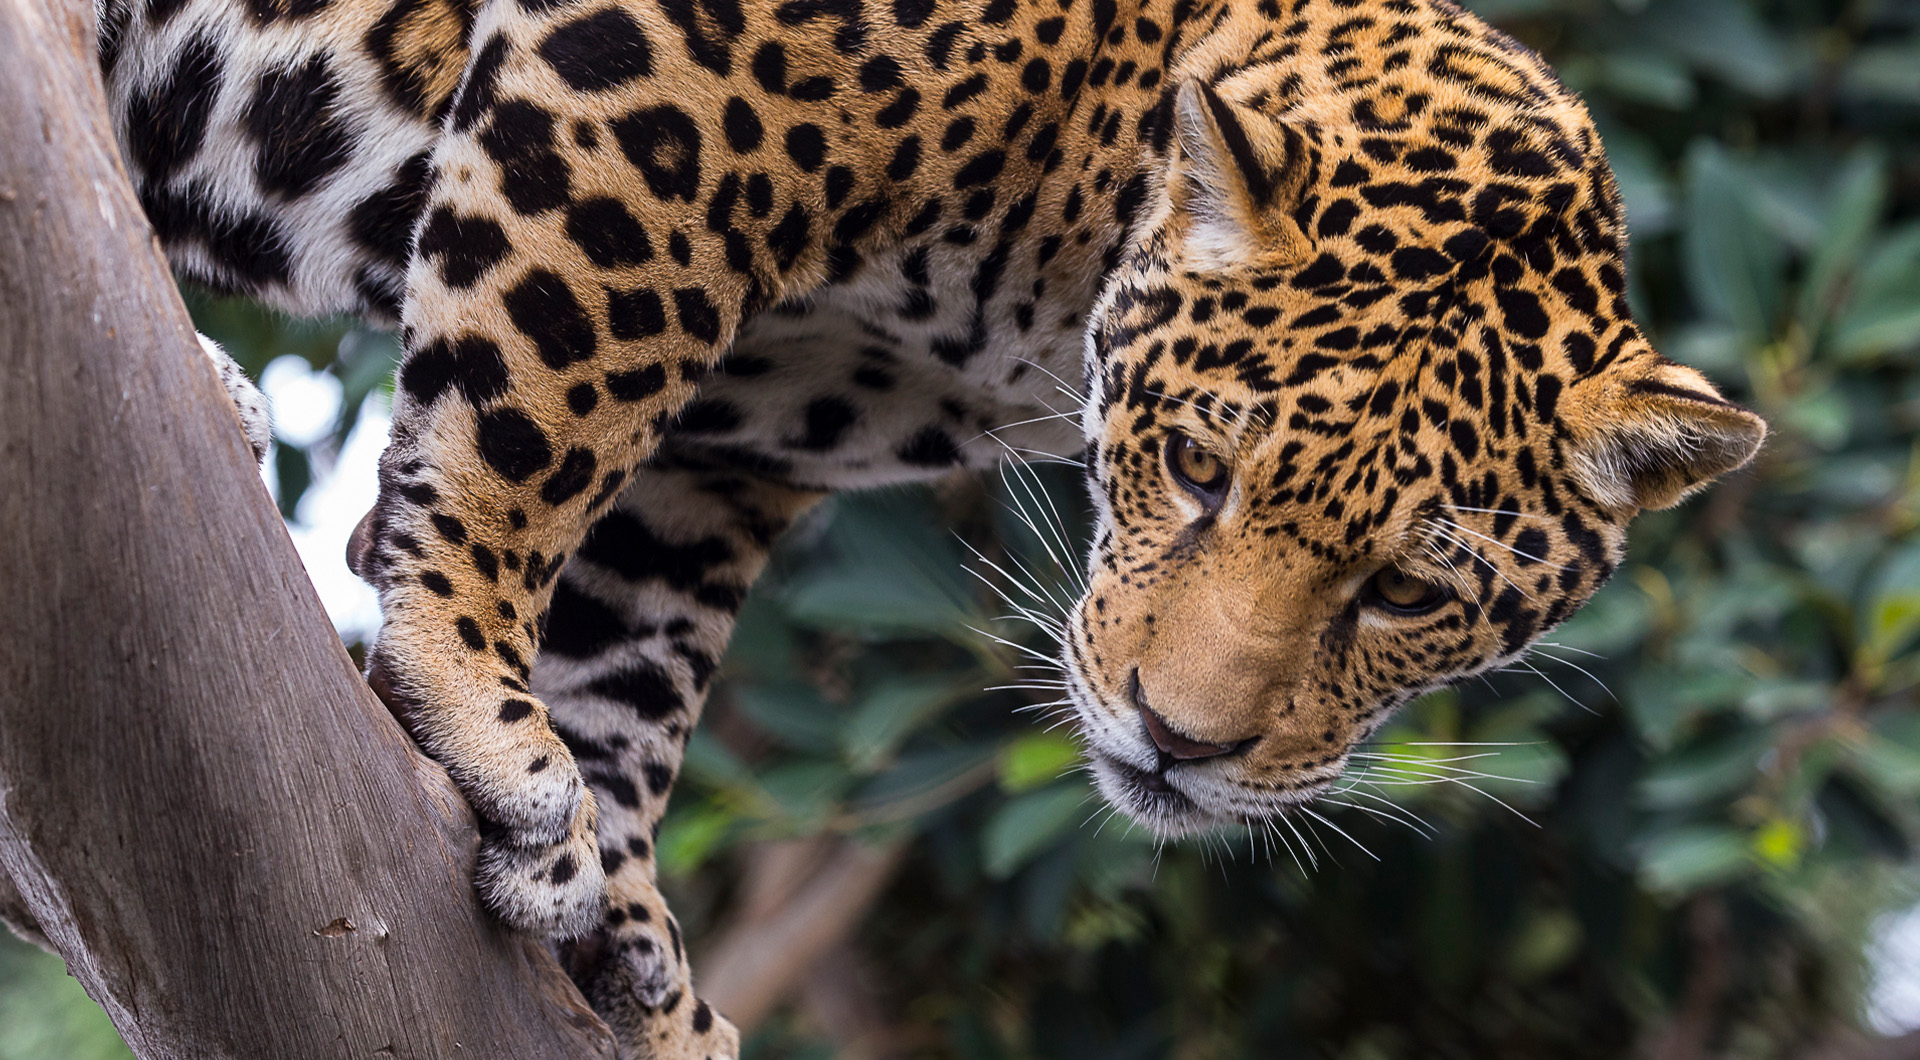 Image of jaguar in a tree branch leaning over and looking to the left